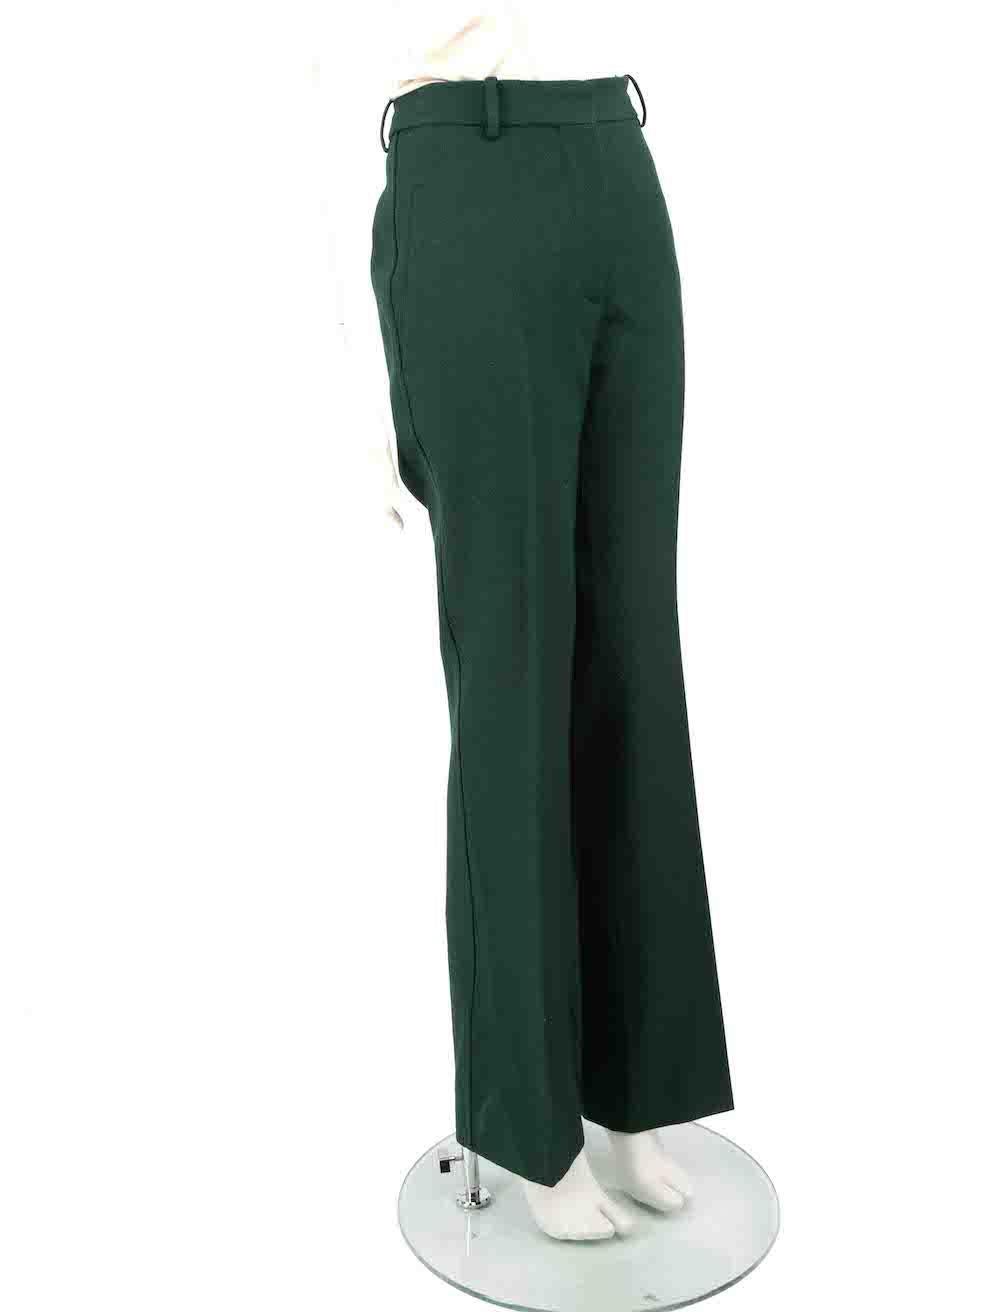 CONDITION is Very good. Hardly any visible wear to trousers is evident on this used Victoria Beckham designer resale item.
 
 Details
 Green
 Wool
 Flared trousers
 Mid rise
 Belt hoops
 Front zip closure with clasps and button
 2x Front side